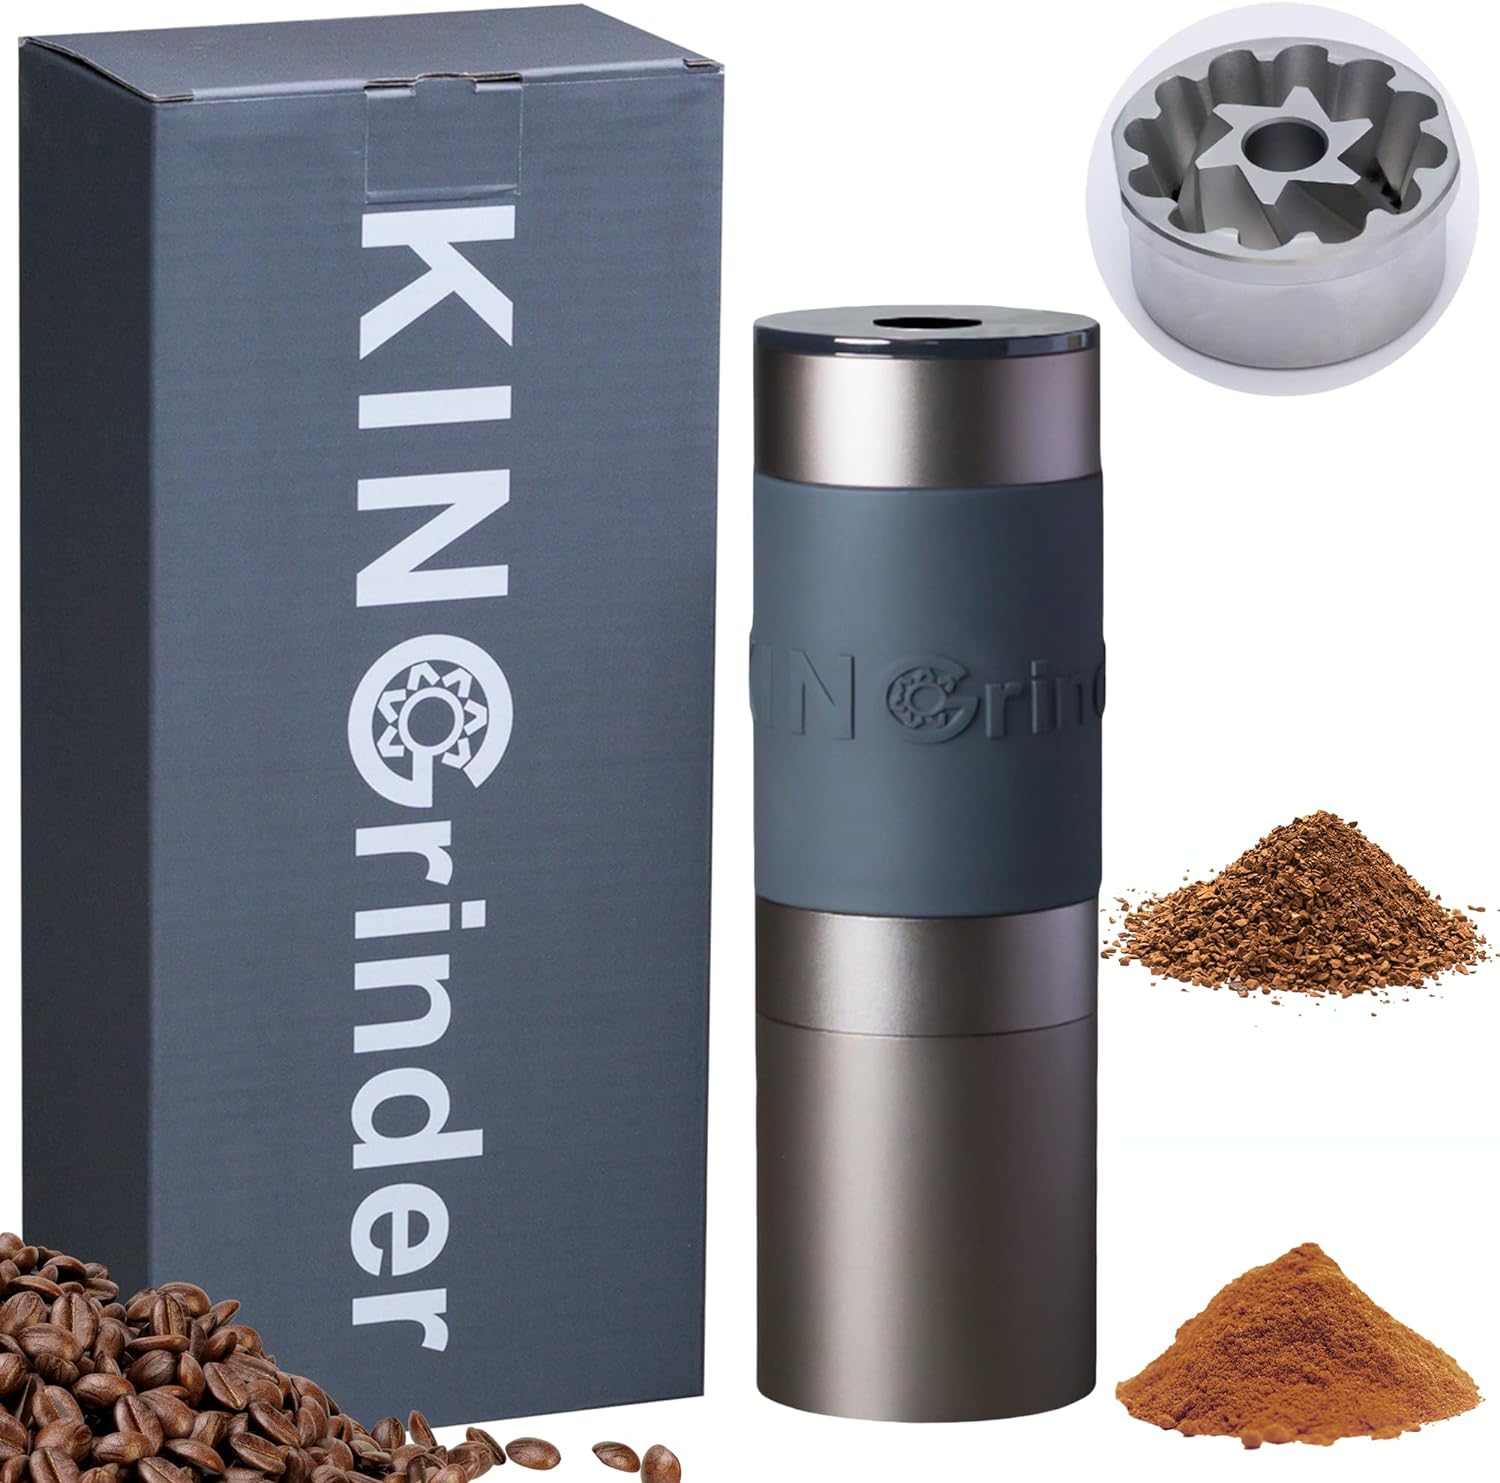 Kingrinder K2 Iron Gray Manual Hand Coffee Grinder 140 Adjustable Grinding Levels for Aeropress French Press Drip Espresso with Mounting Consistency Stainless Stainless Steel Conical Milling Grinder